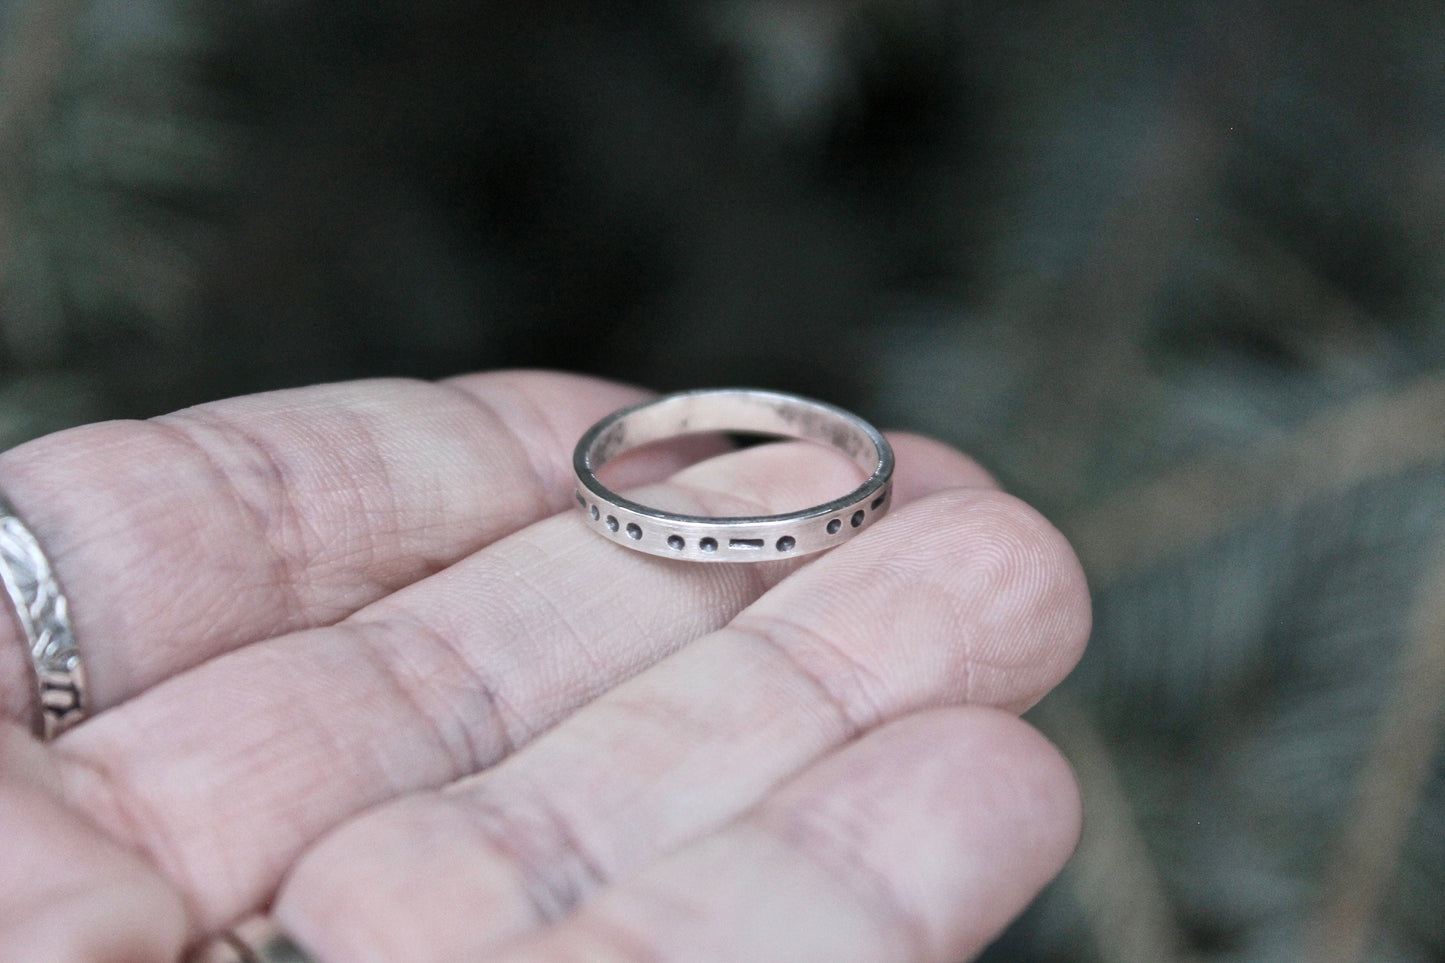 Best Friends (BFF) Morse Code Ring in Sterling Silver